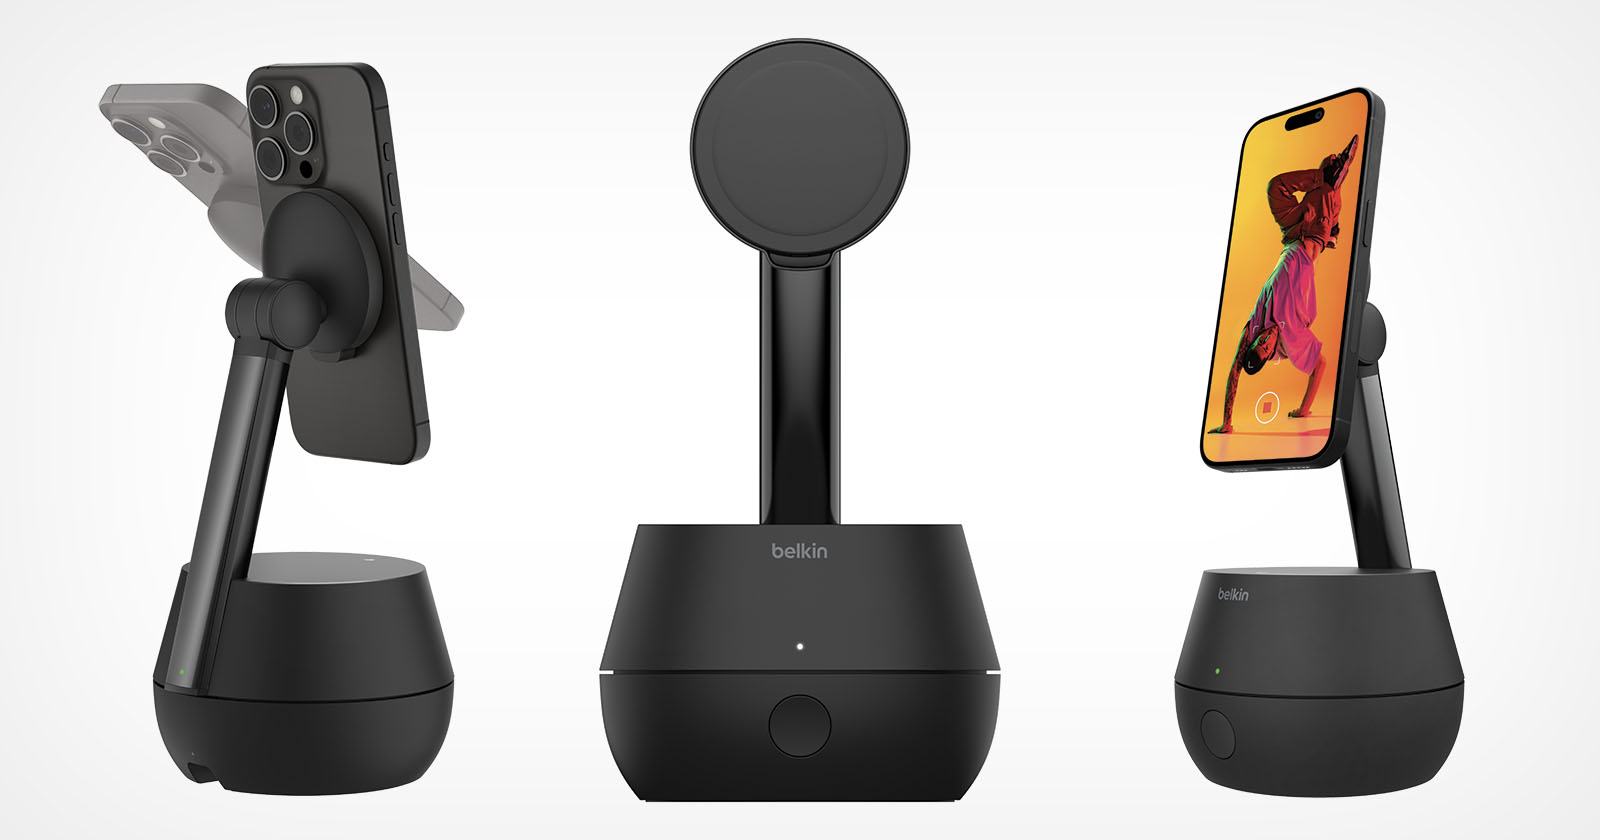  belkin auto-tracking stand pro turns your iphone into 